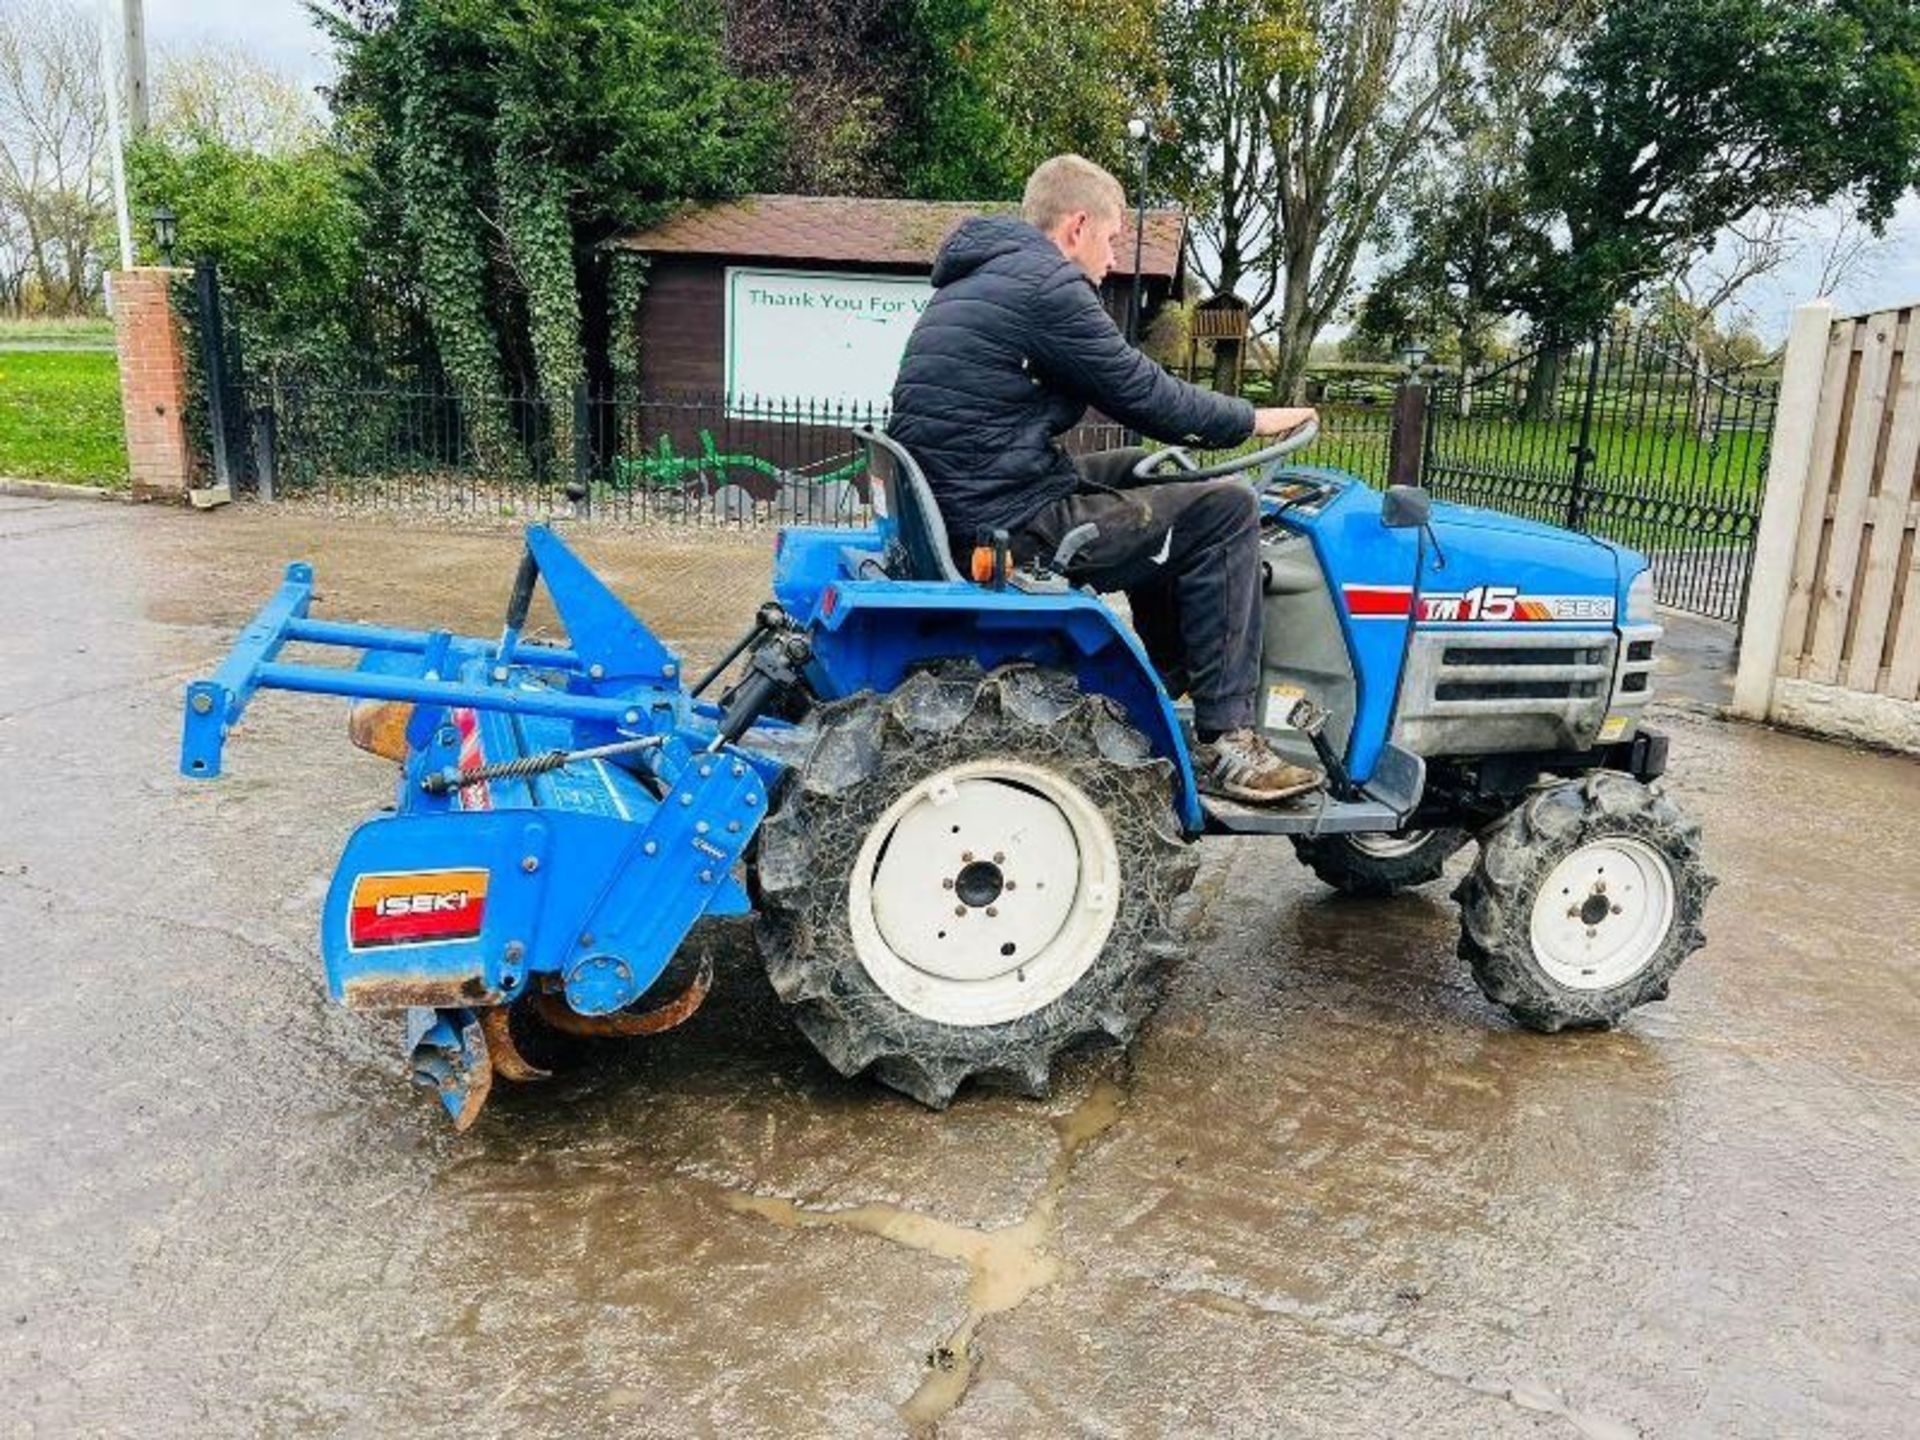 ISEKI TM15 4WD COMPACT TRACTOR C/W REAR ROTAVATOR - Image 9 of 12